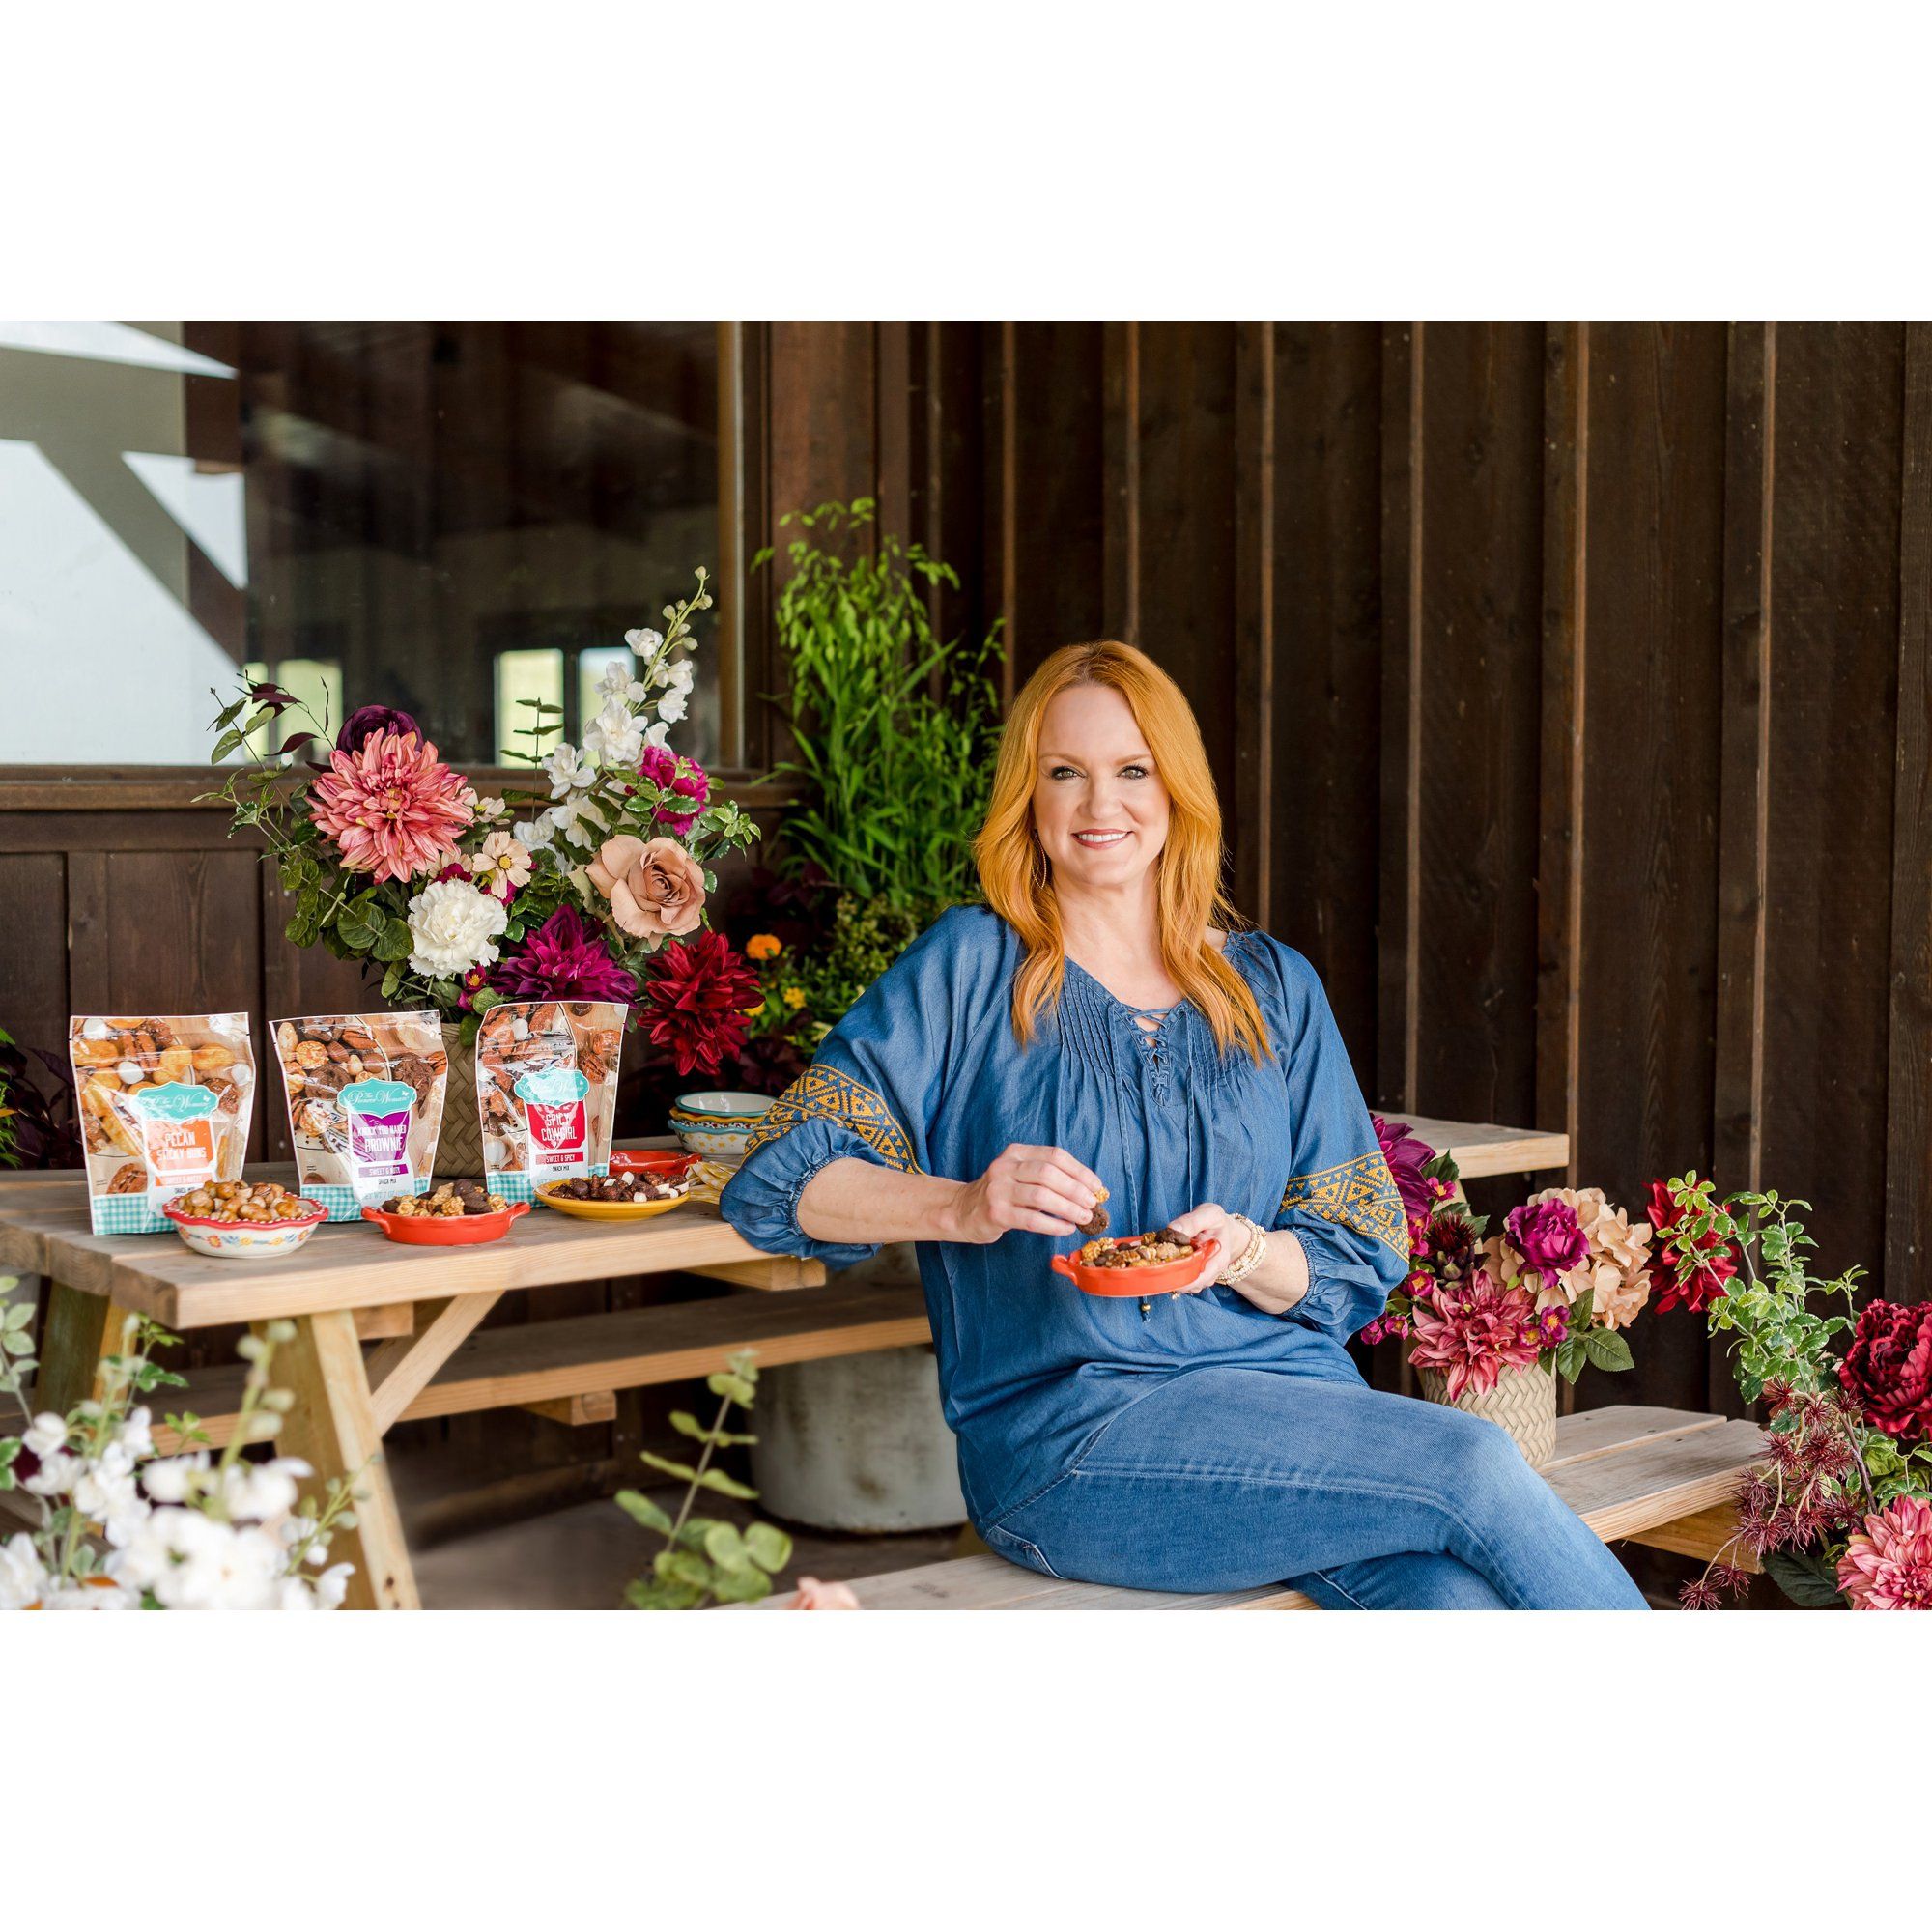 The Pioneer Woman Plants at Walmart - Where to Buy Ree Drummond's Flowers